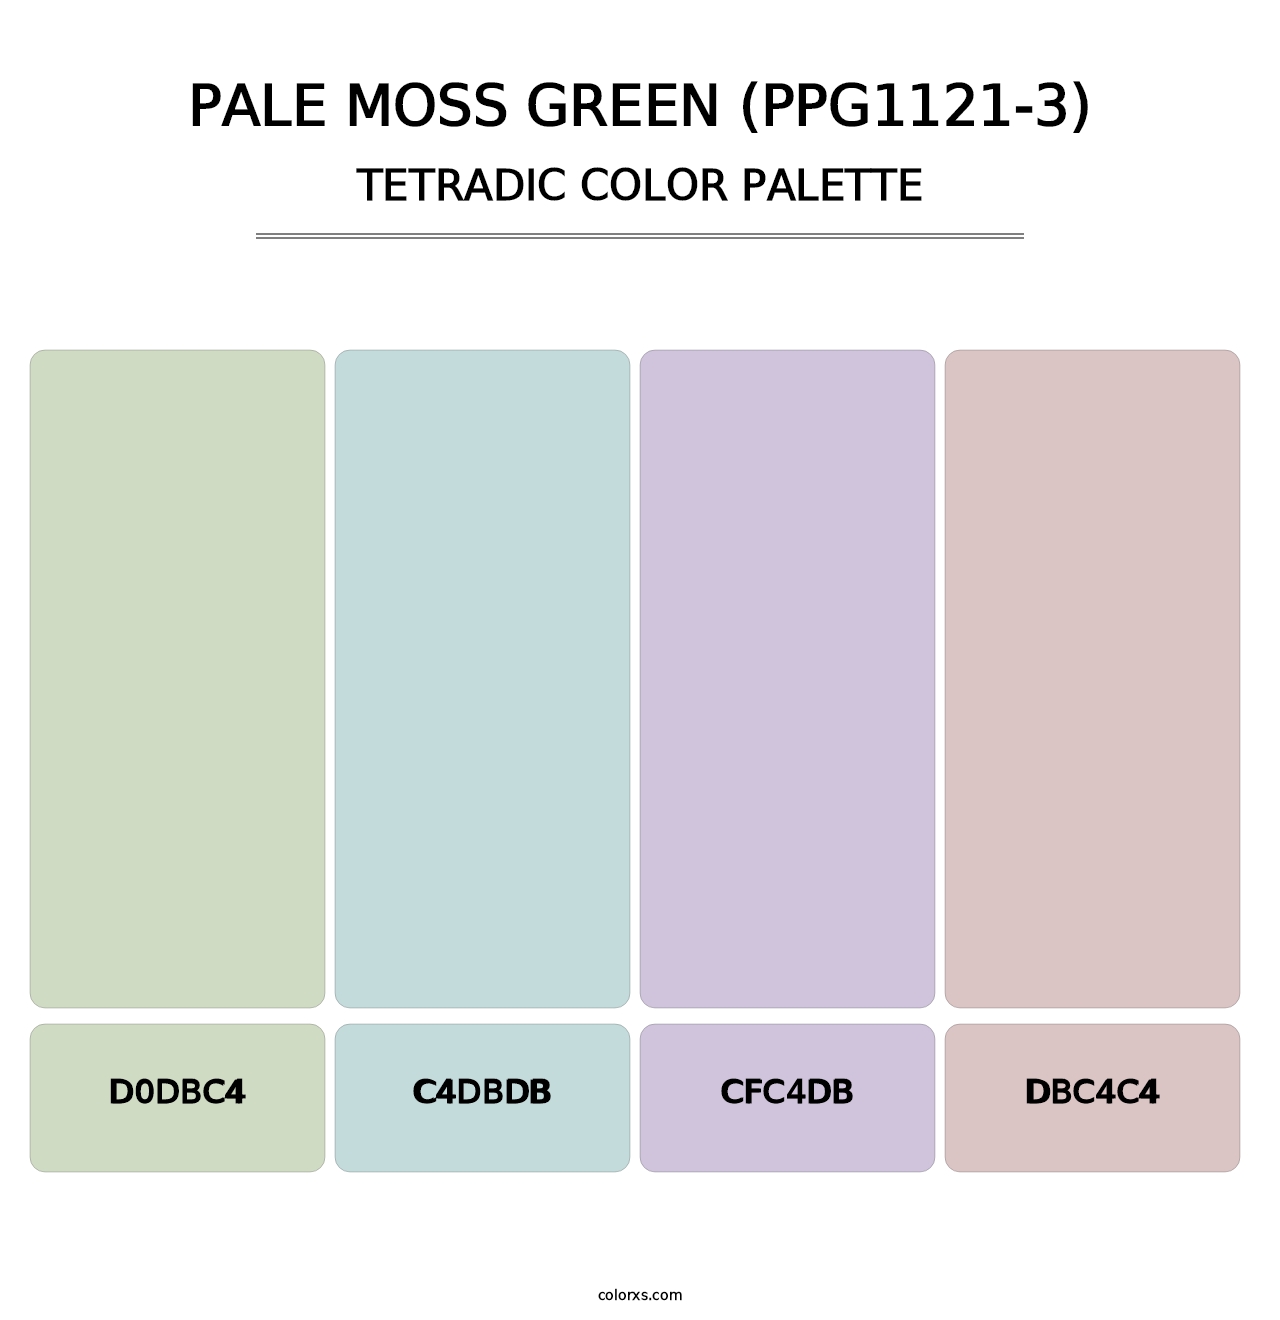 Pale Moss Green (PPG1121-3) - Tetradic Color Palette